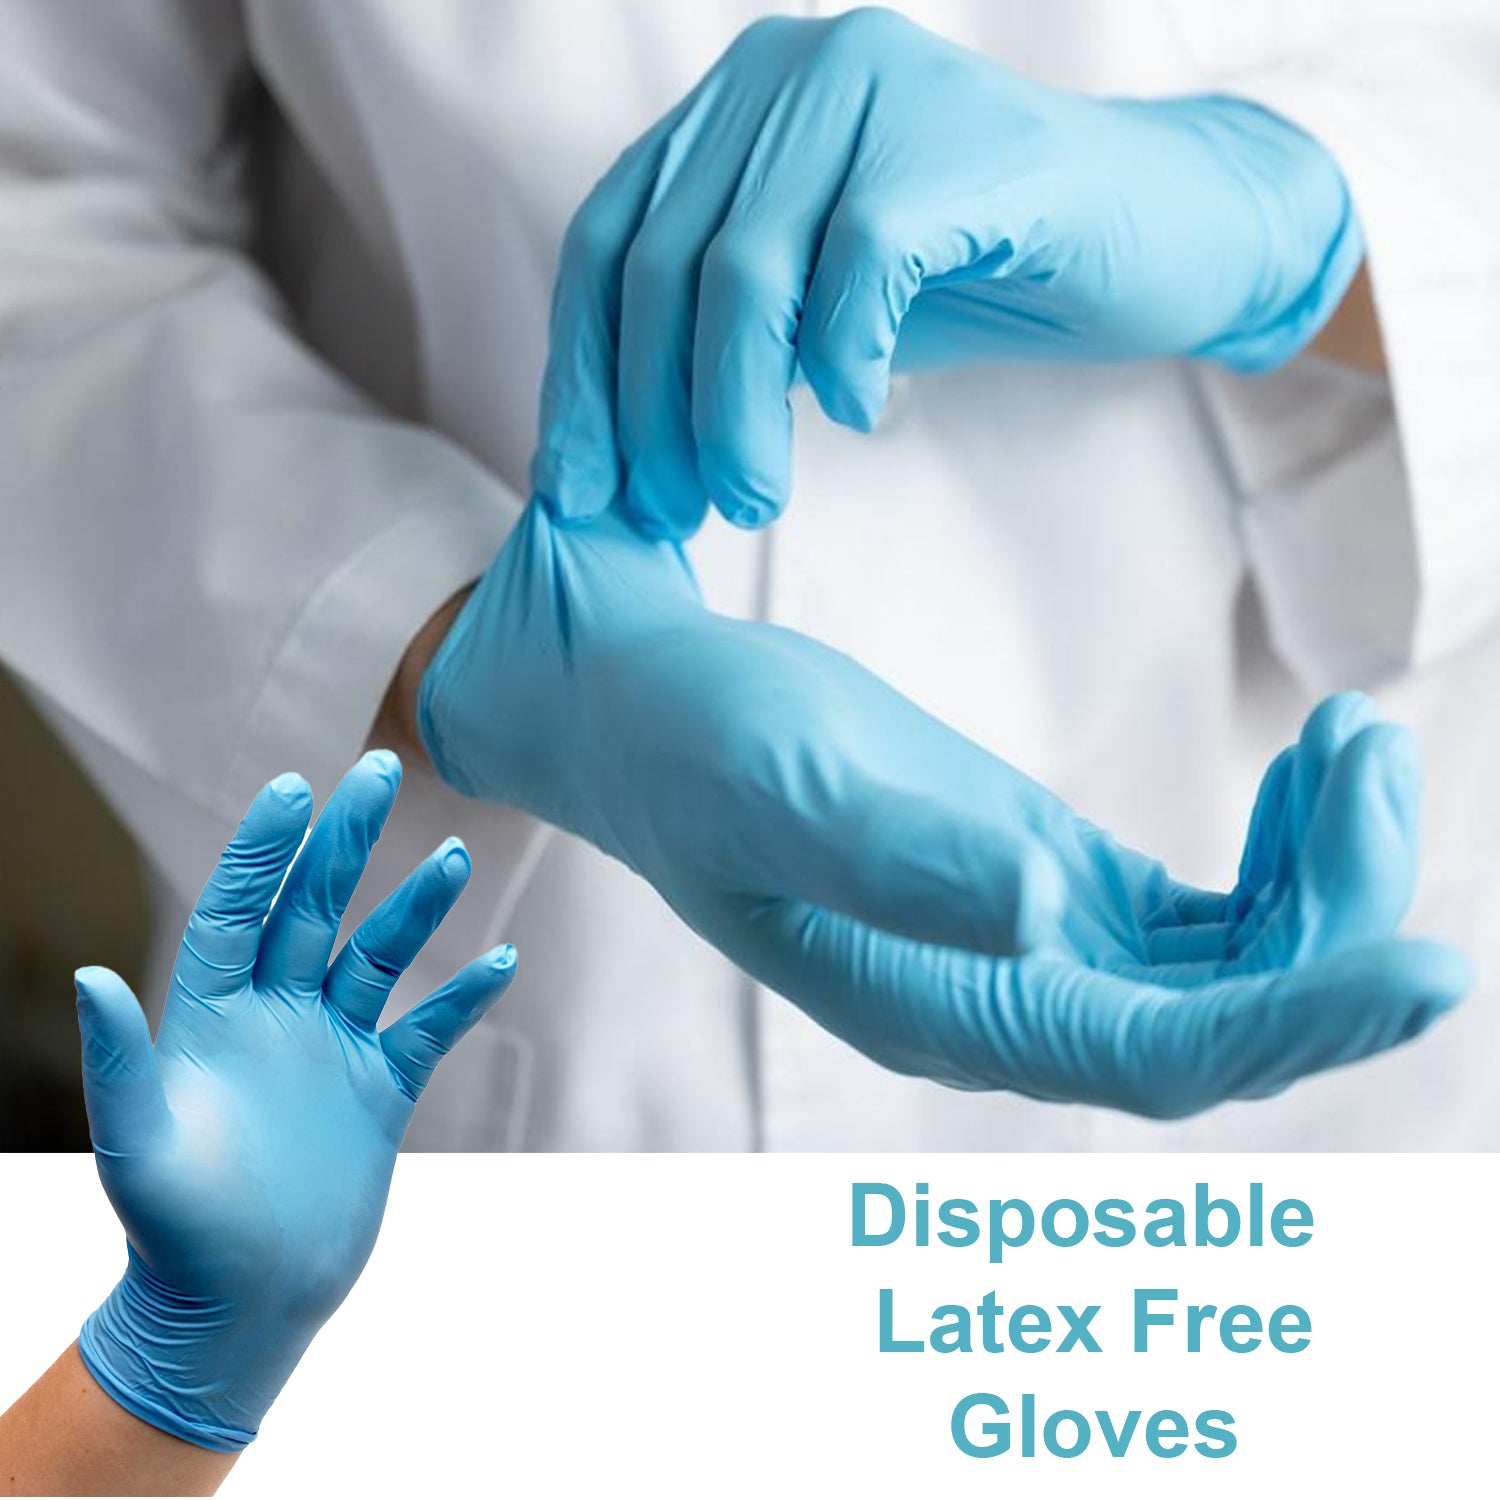 Premier AF Nitrile Examination Gloves | Sterile | Latex Free | XLarge | Pack of 50 Pairs | Short Expiry Date (4)